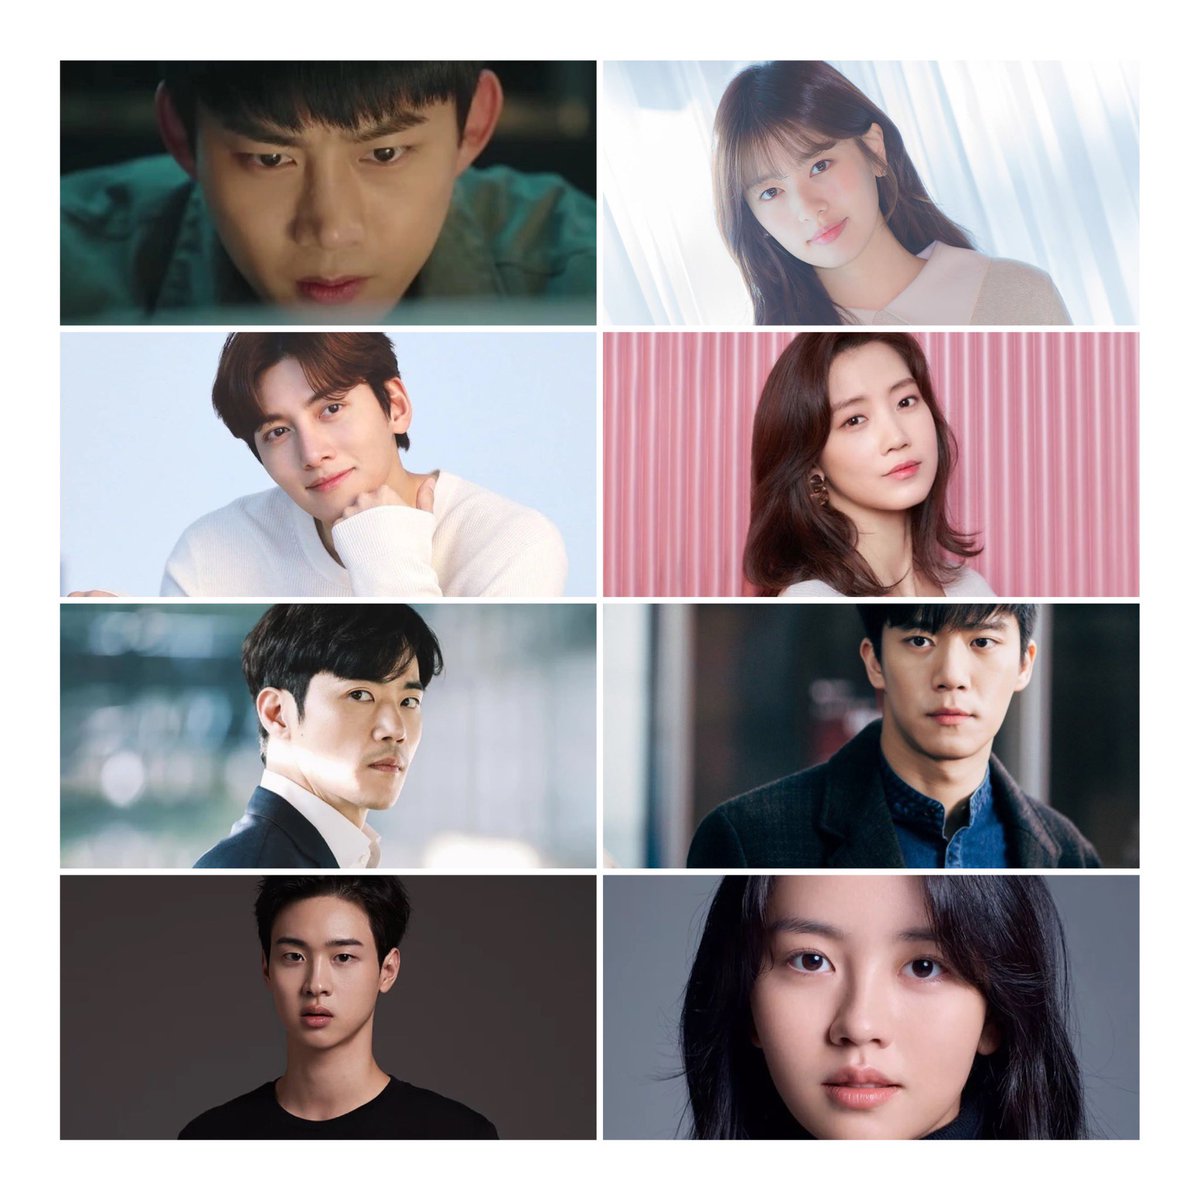 I would love to see the following actors in a weekend drama, not necessarily together. Some have acted in weekend dramas before, so I hope they get to do another one. #OkTaecyeon, #JungSoMin, #JiChangWook, #ShinHyunBin, #KimKangWoo, #HaSeokJin, #JangDongYoon and #KimSoHyun.